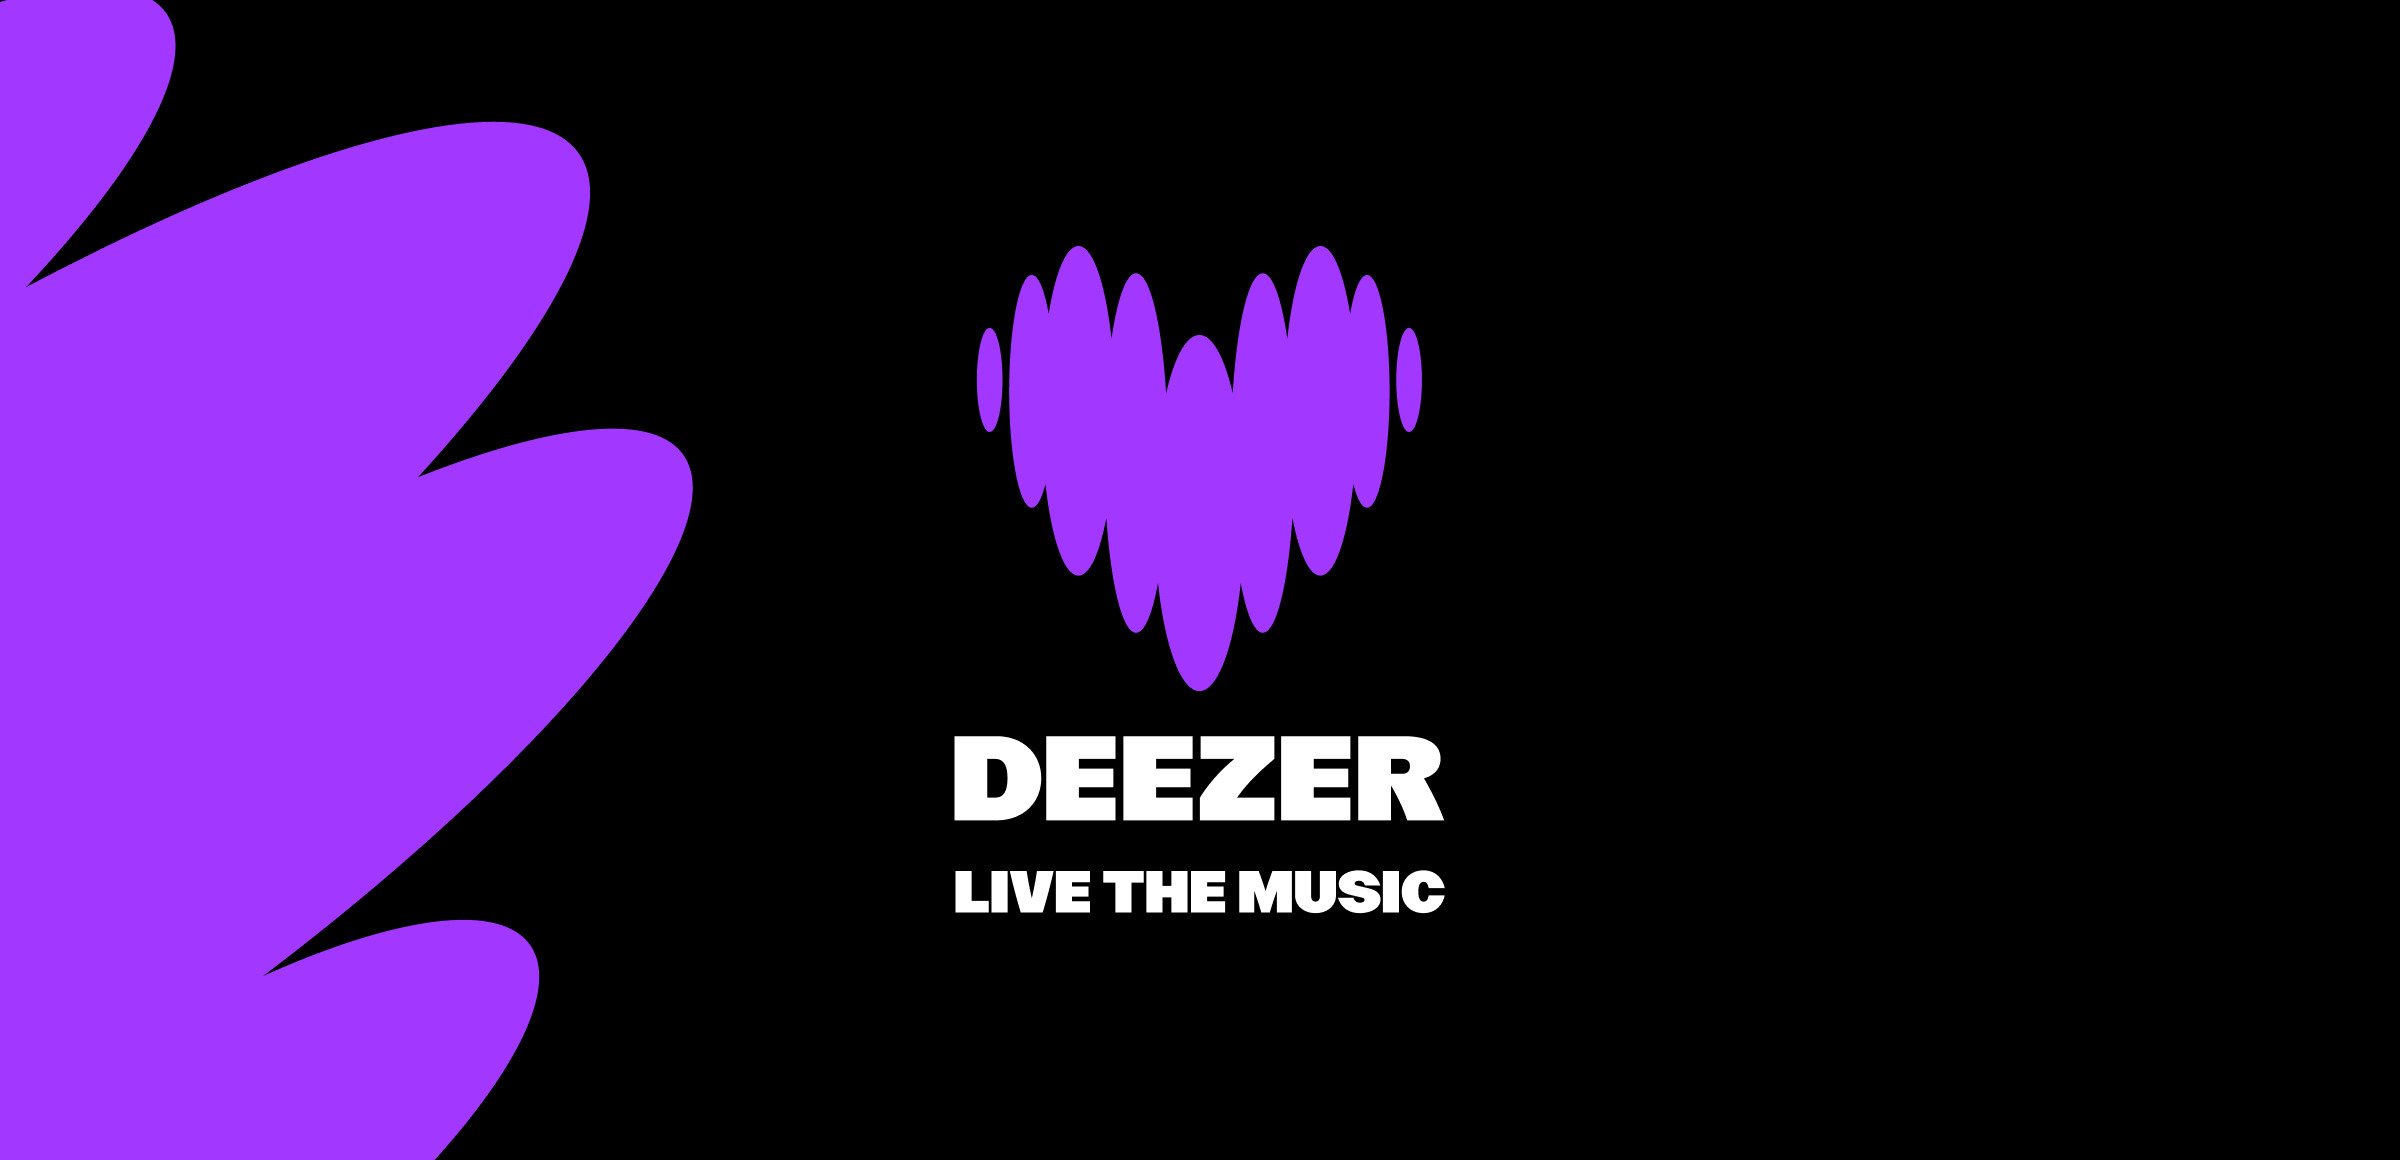 Deezer reveals bold new brand identity and logo – setting the stage for ...